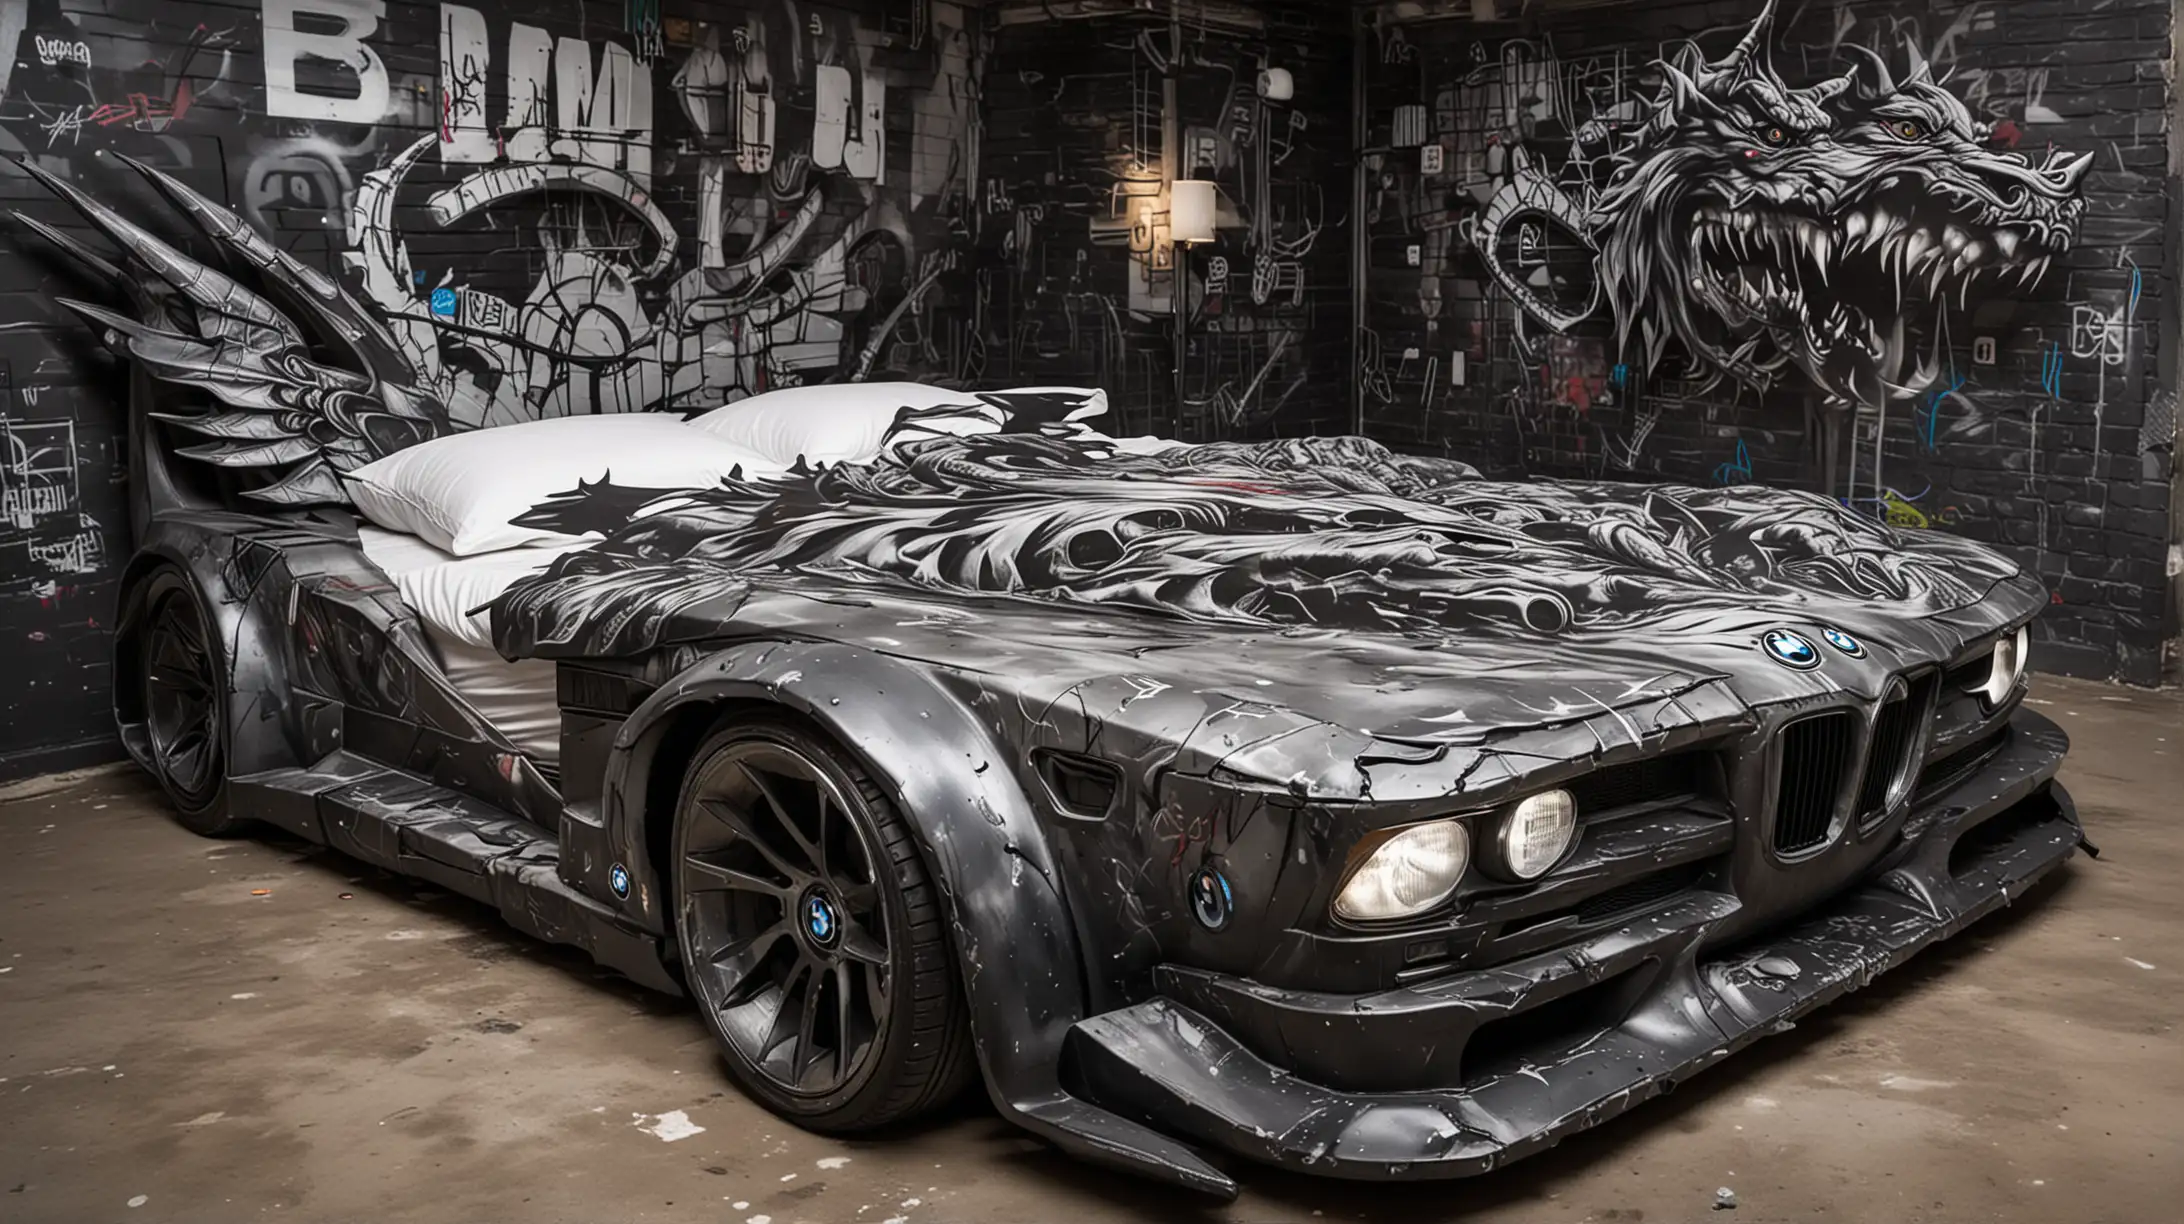 BMW Car Shaped Double Bed with Evil Dragon Graffiti